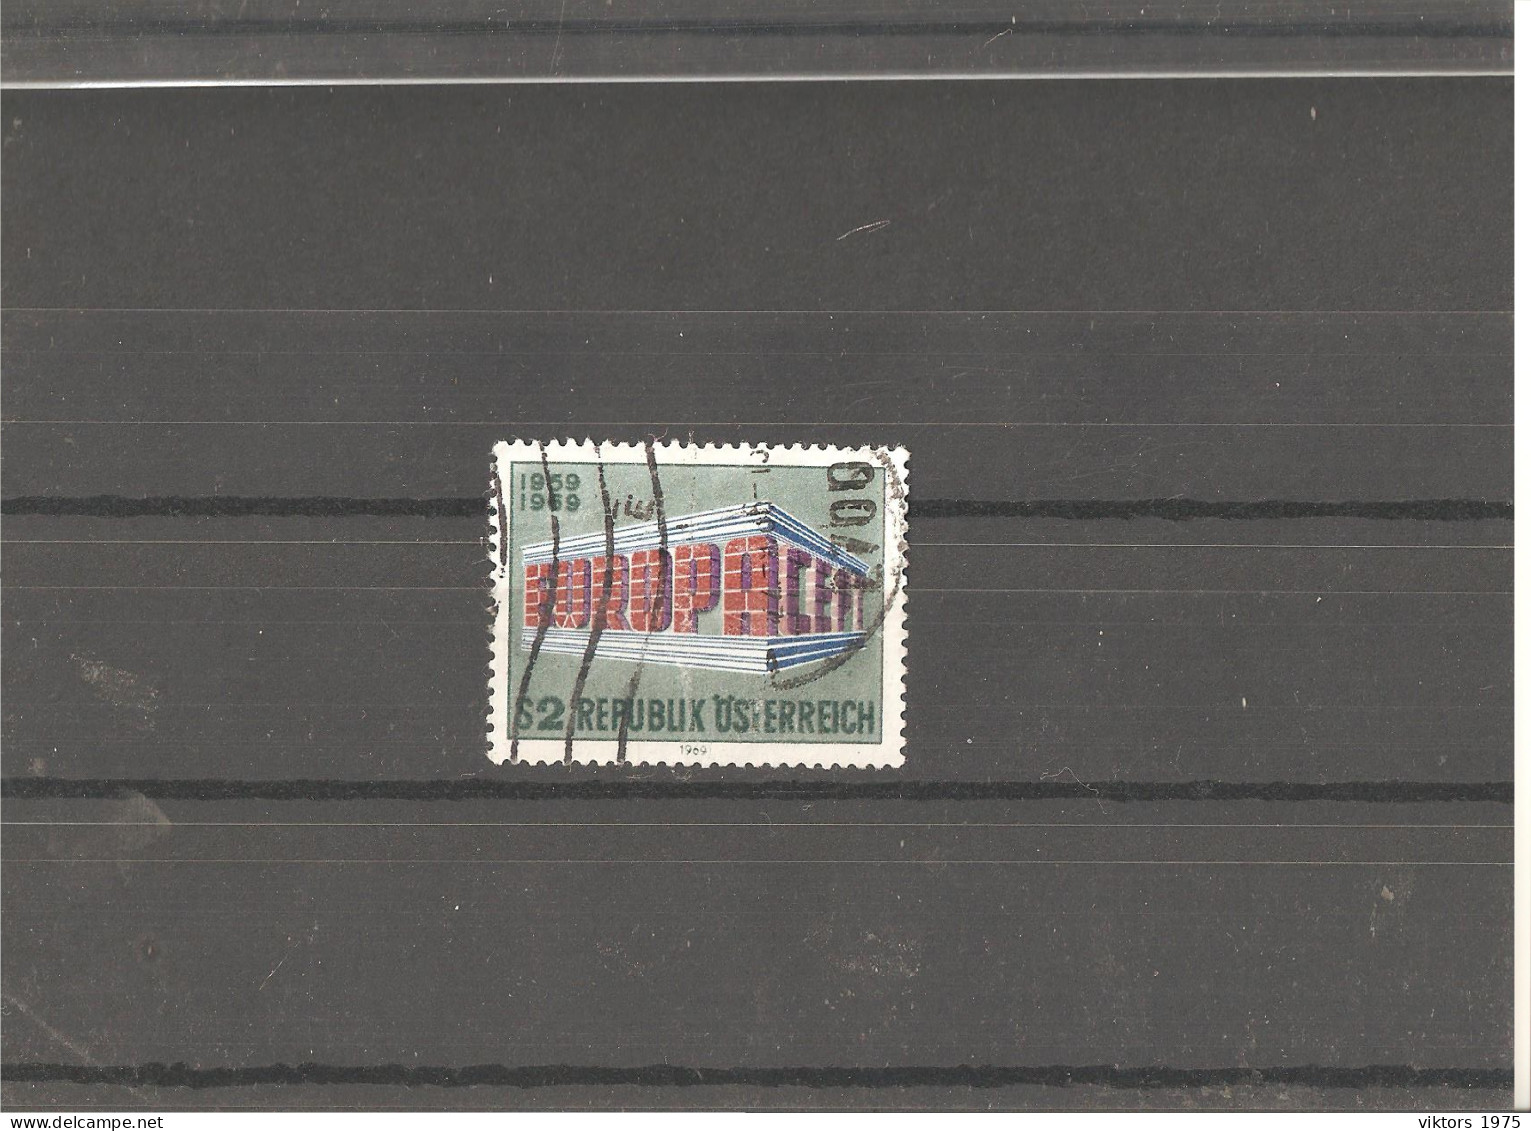 Used Stamp Nr.1291 In MICHEL Catalog - Used Stamps